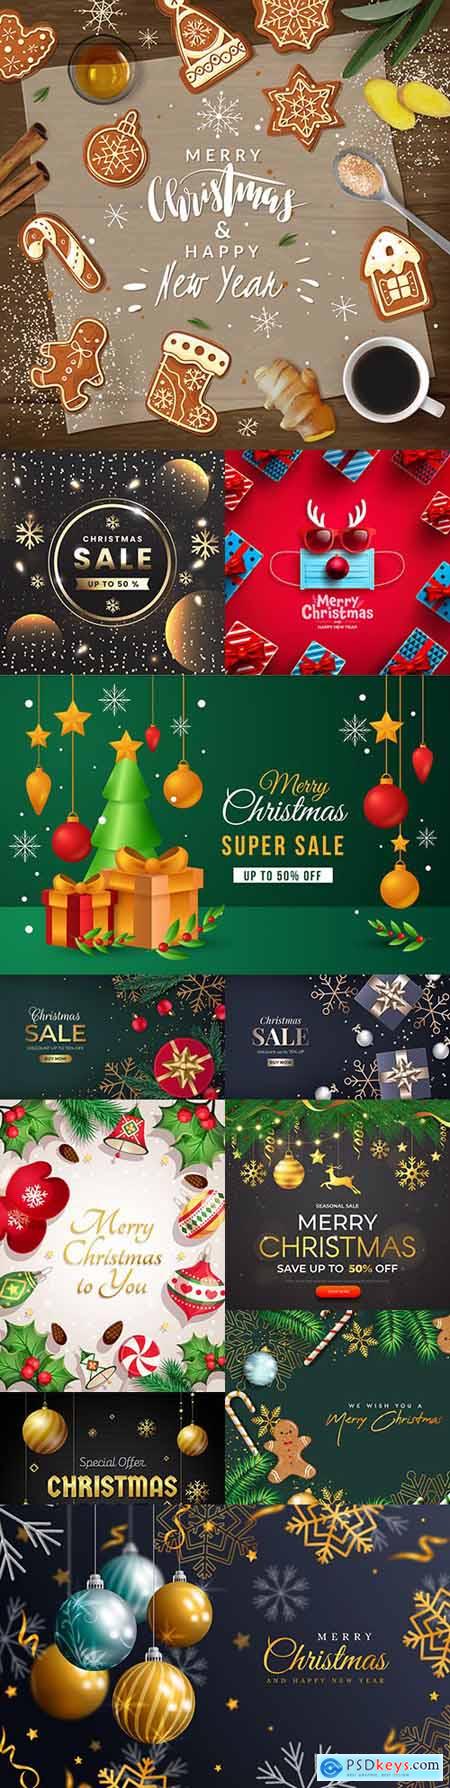 Christmas sale and New Year background realistic illustration